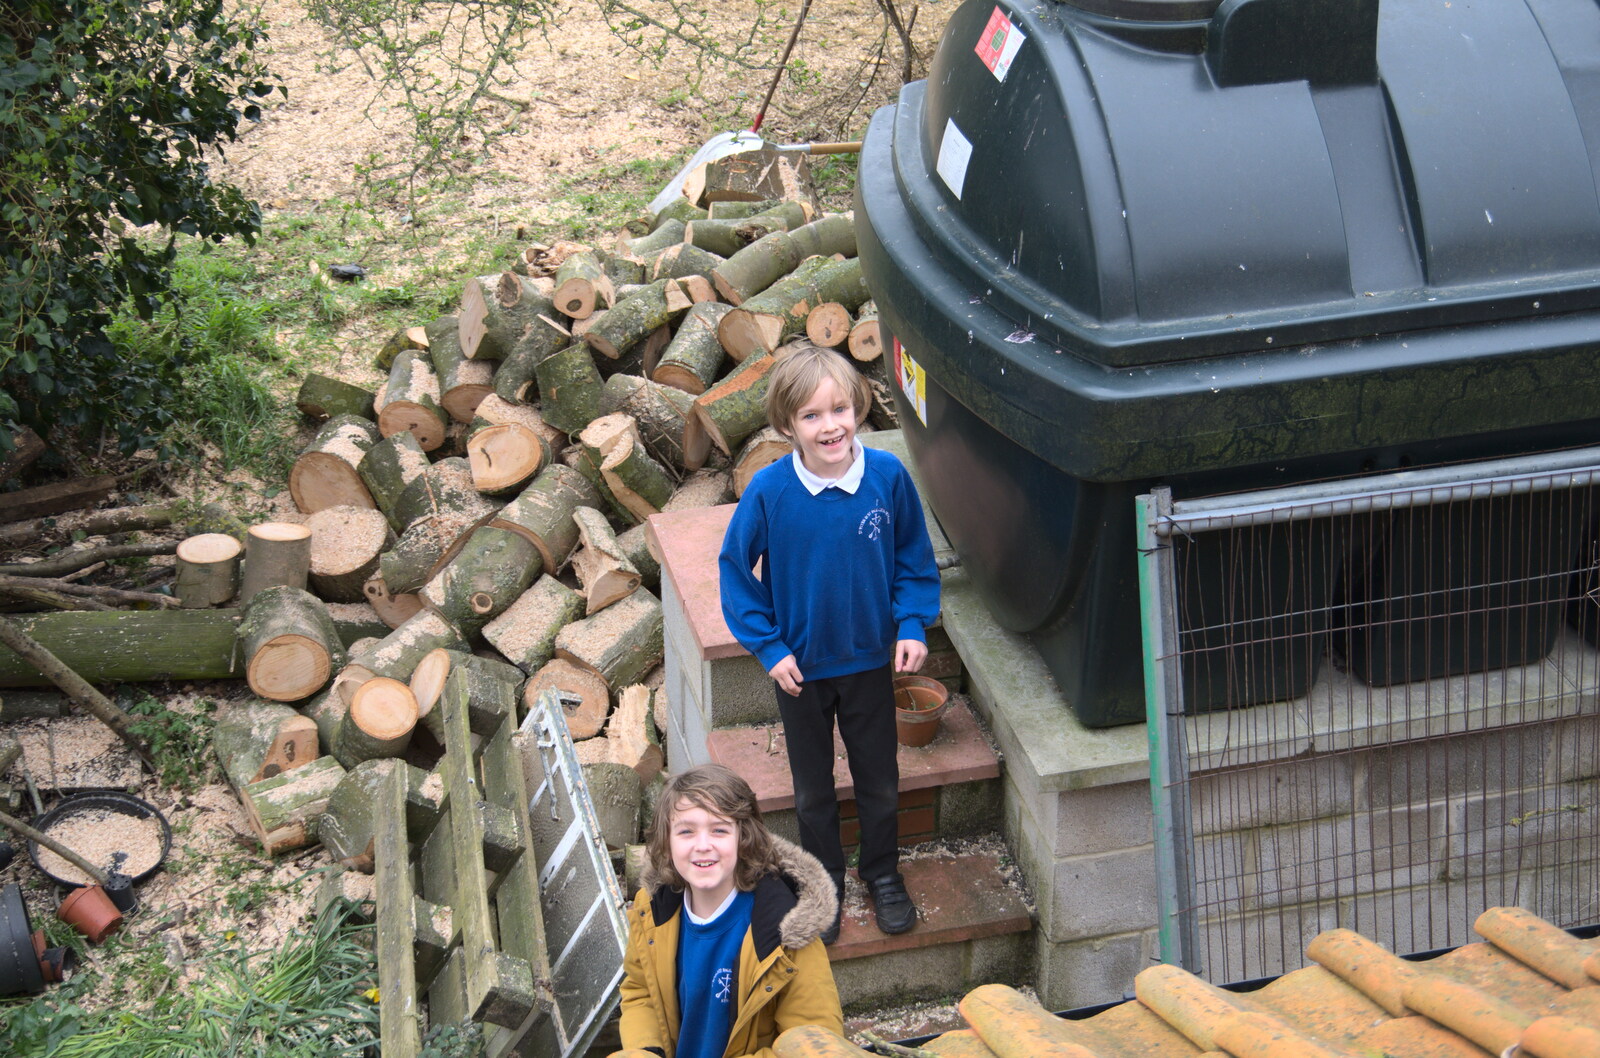 The boys explore the new wood pile from Life Before Lockdown: A March Miscellany - 22nd March 2020